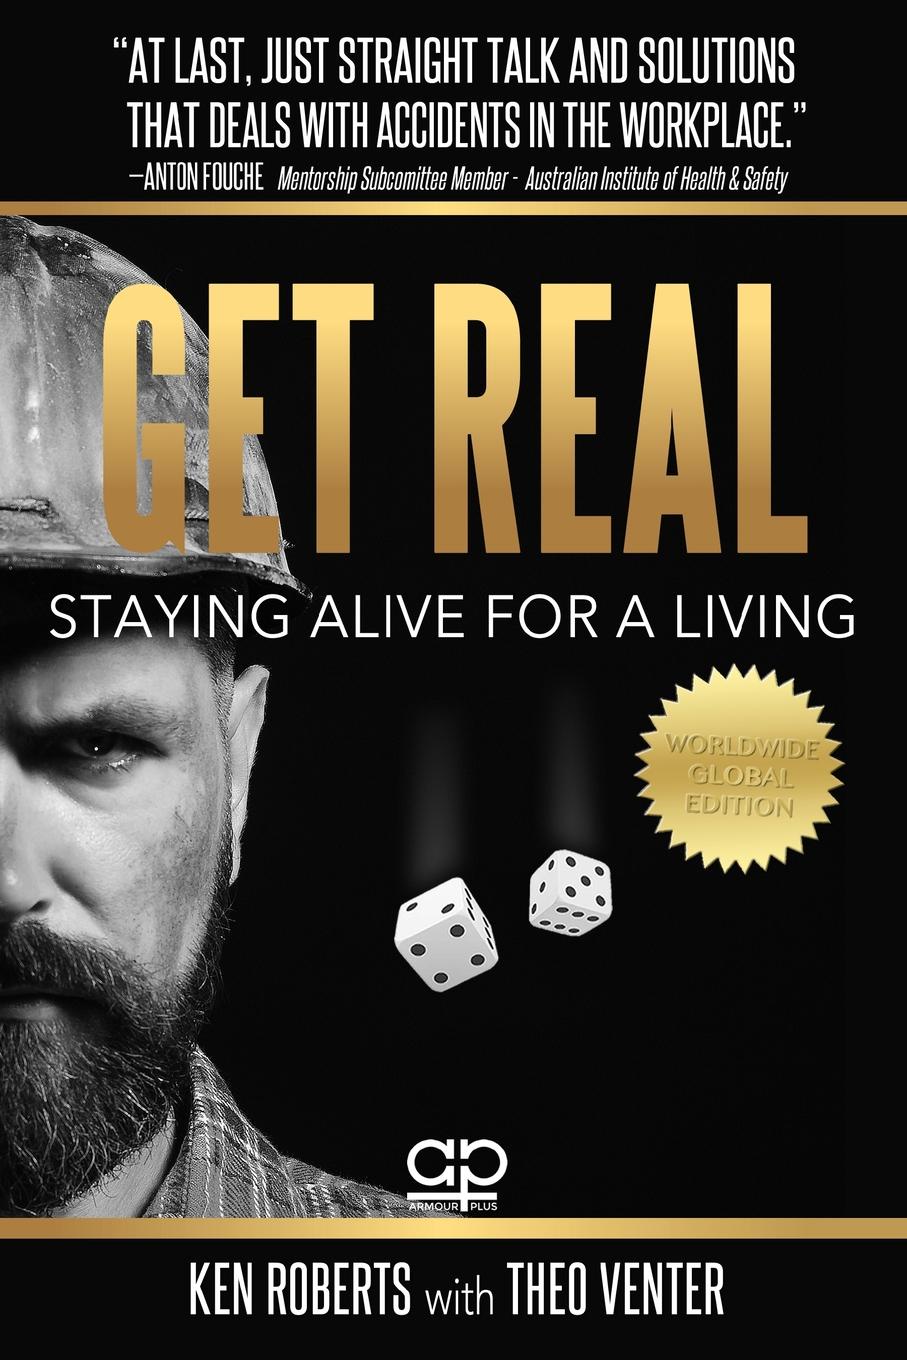 Get Real. Staying Alive For A Living